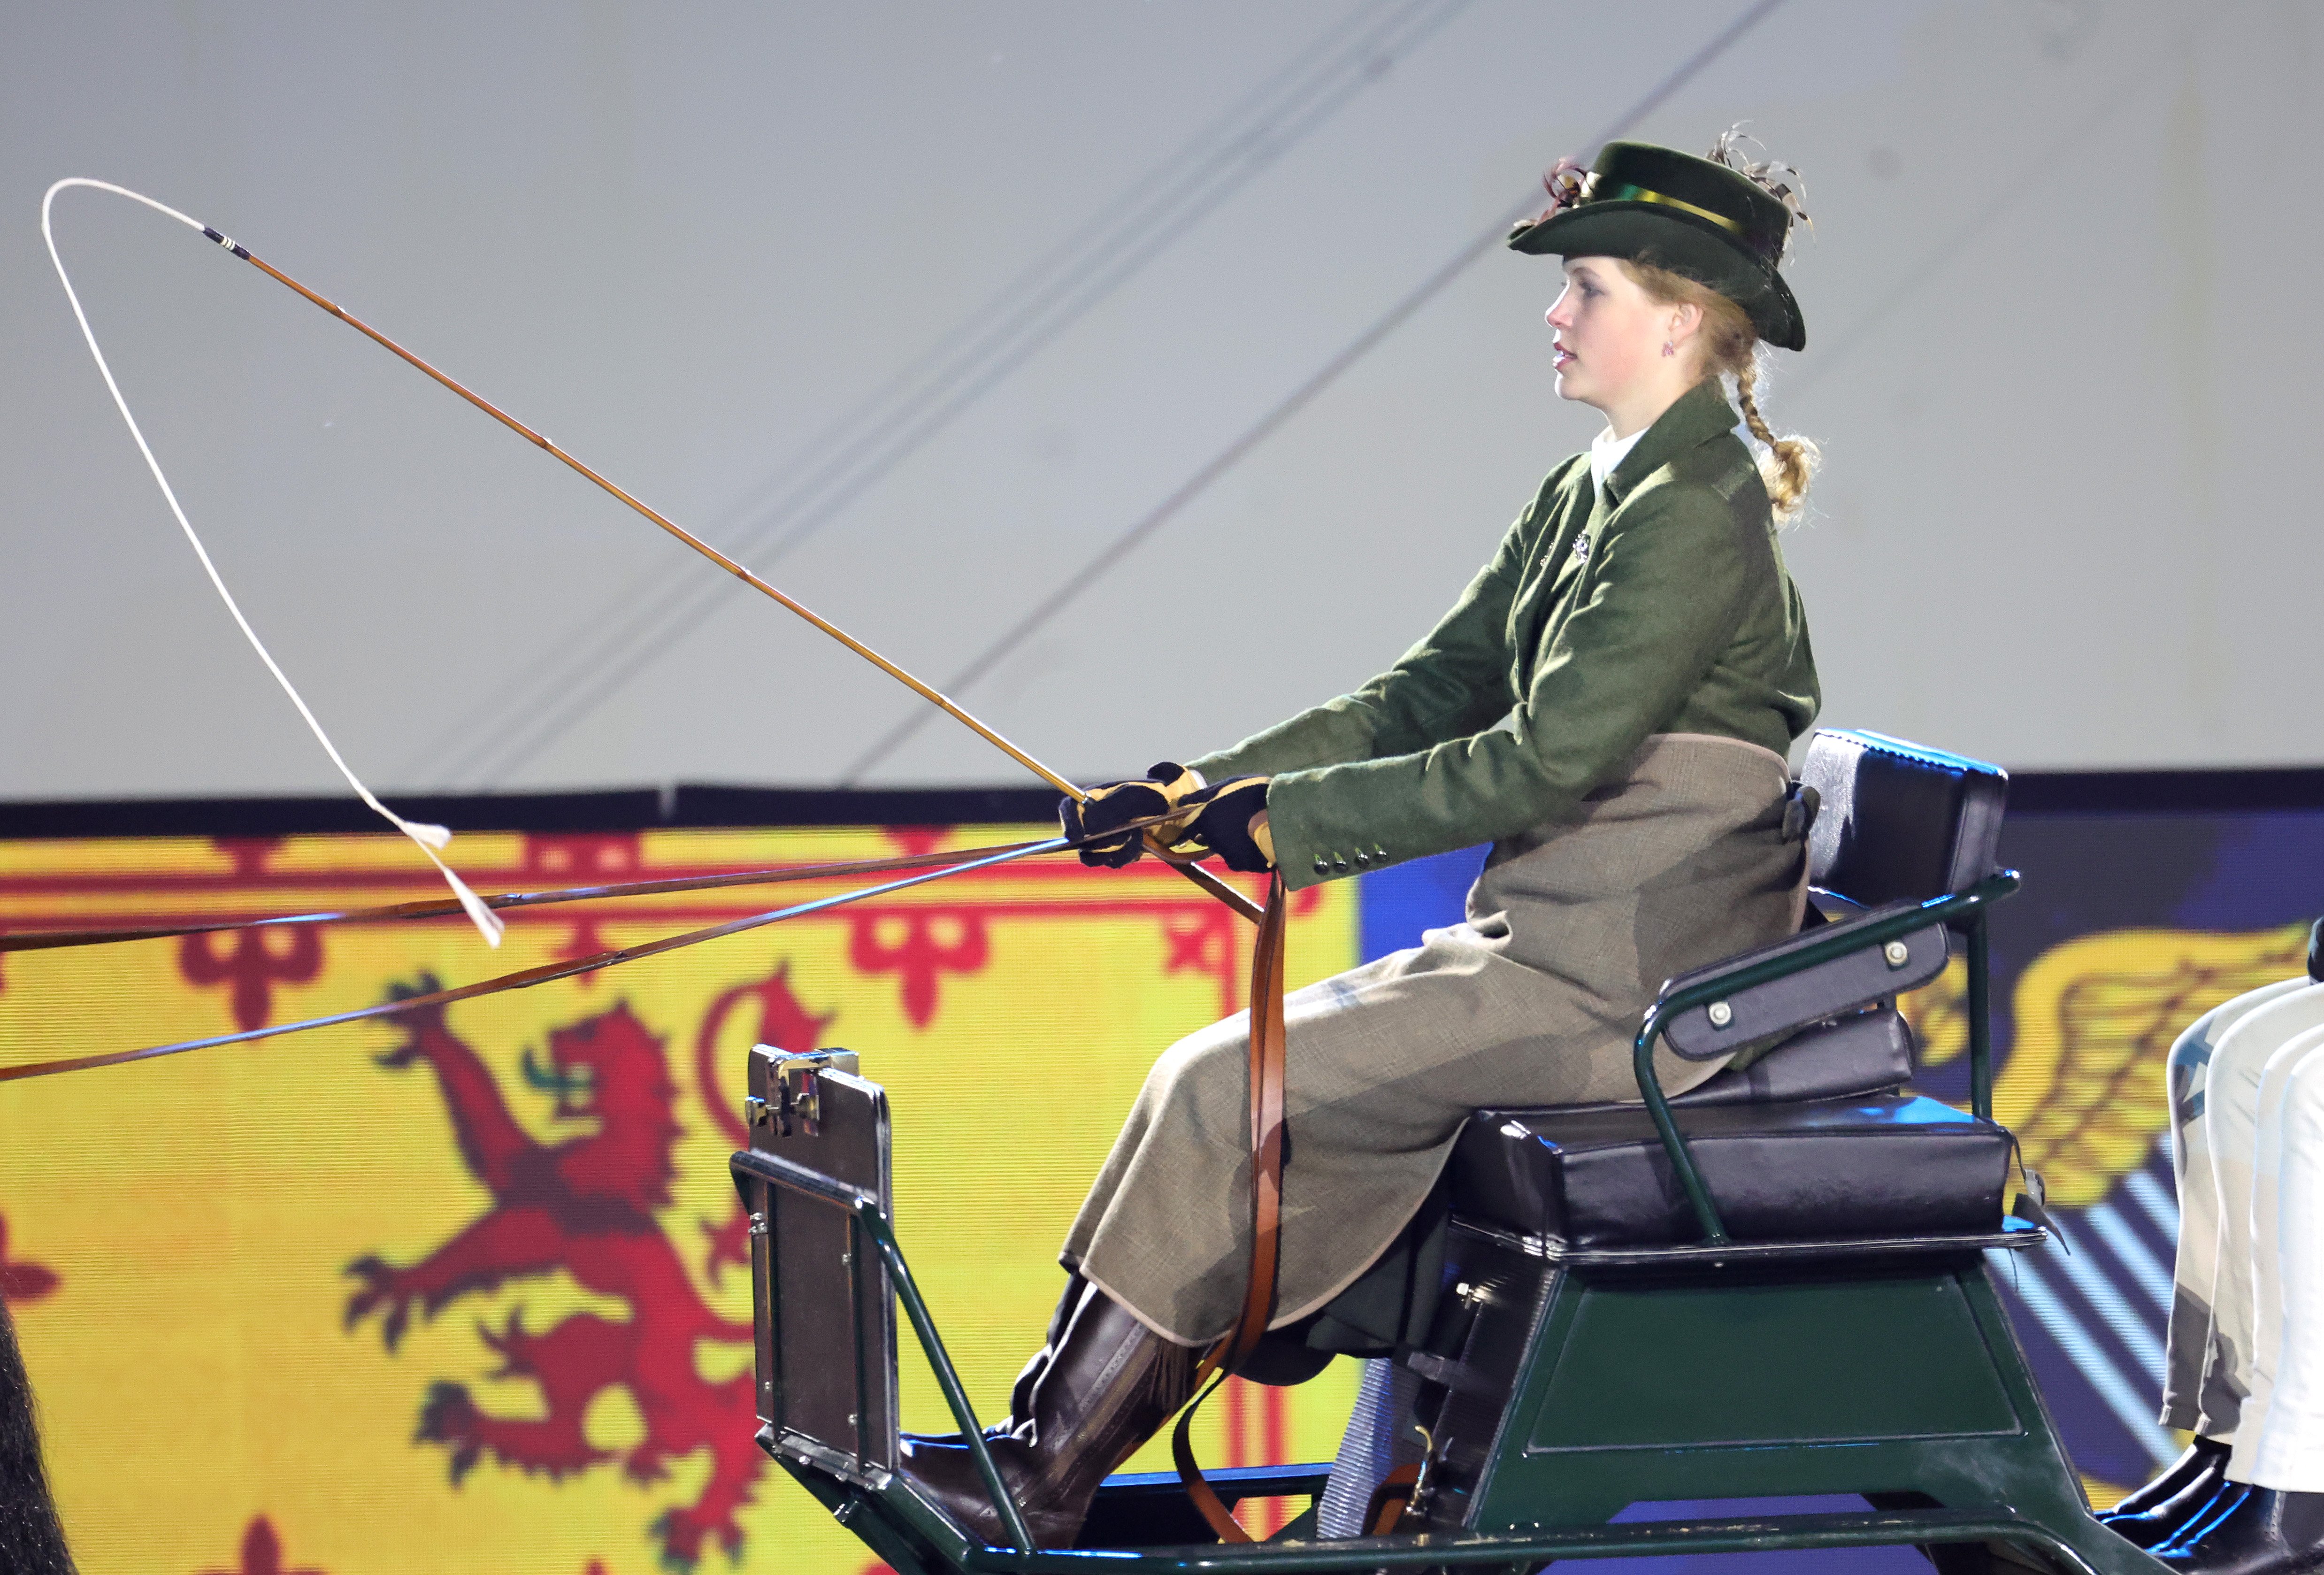 Lady Louise rides Prince Philips carriage as part of the Jubilee Celebrations at the Royal Windsor Horse Show at Home Park on May 15, 2022 in Windsor, England | Source: Getty Images